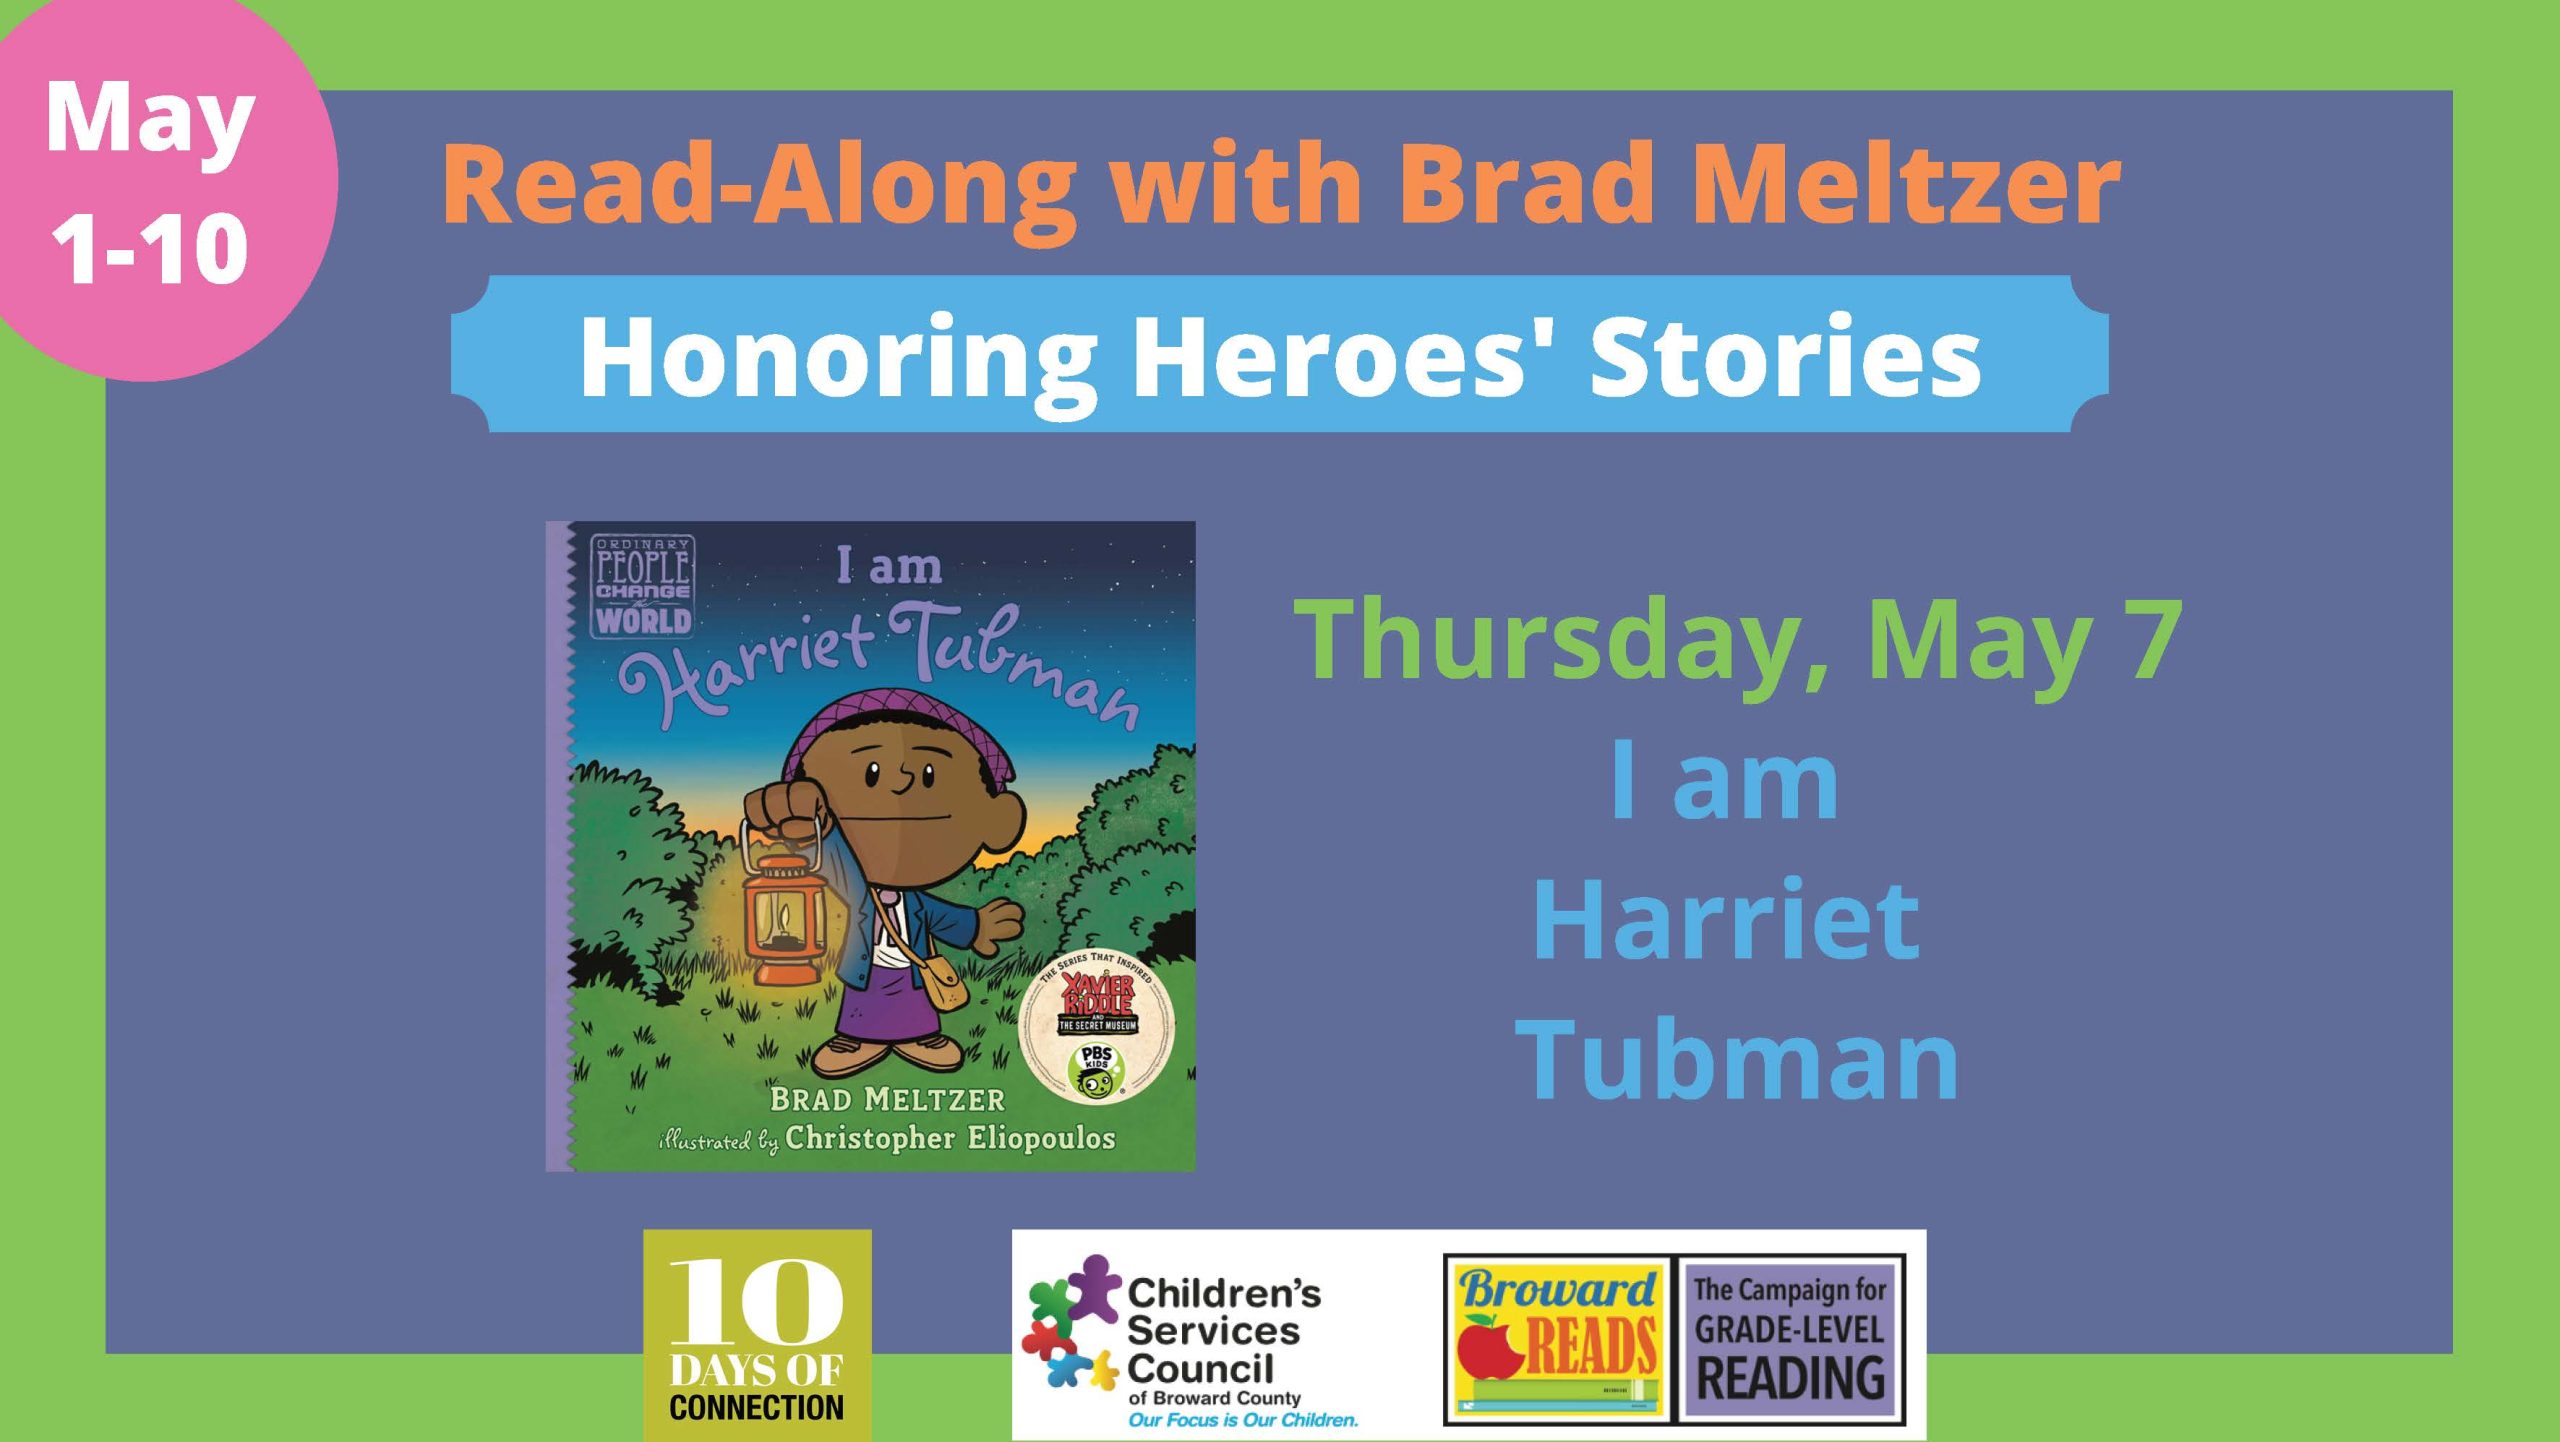 read along with brad meltzer image five